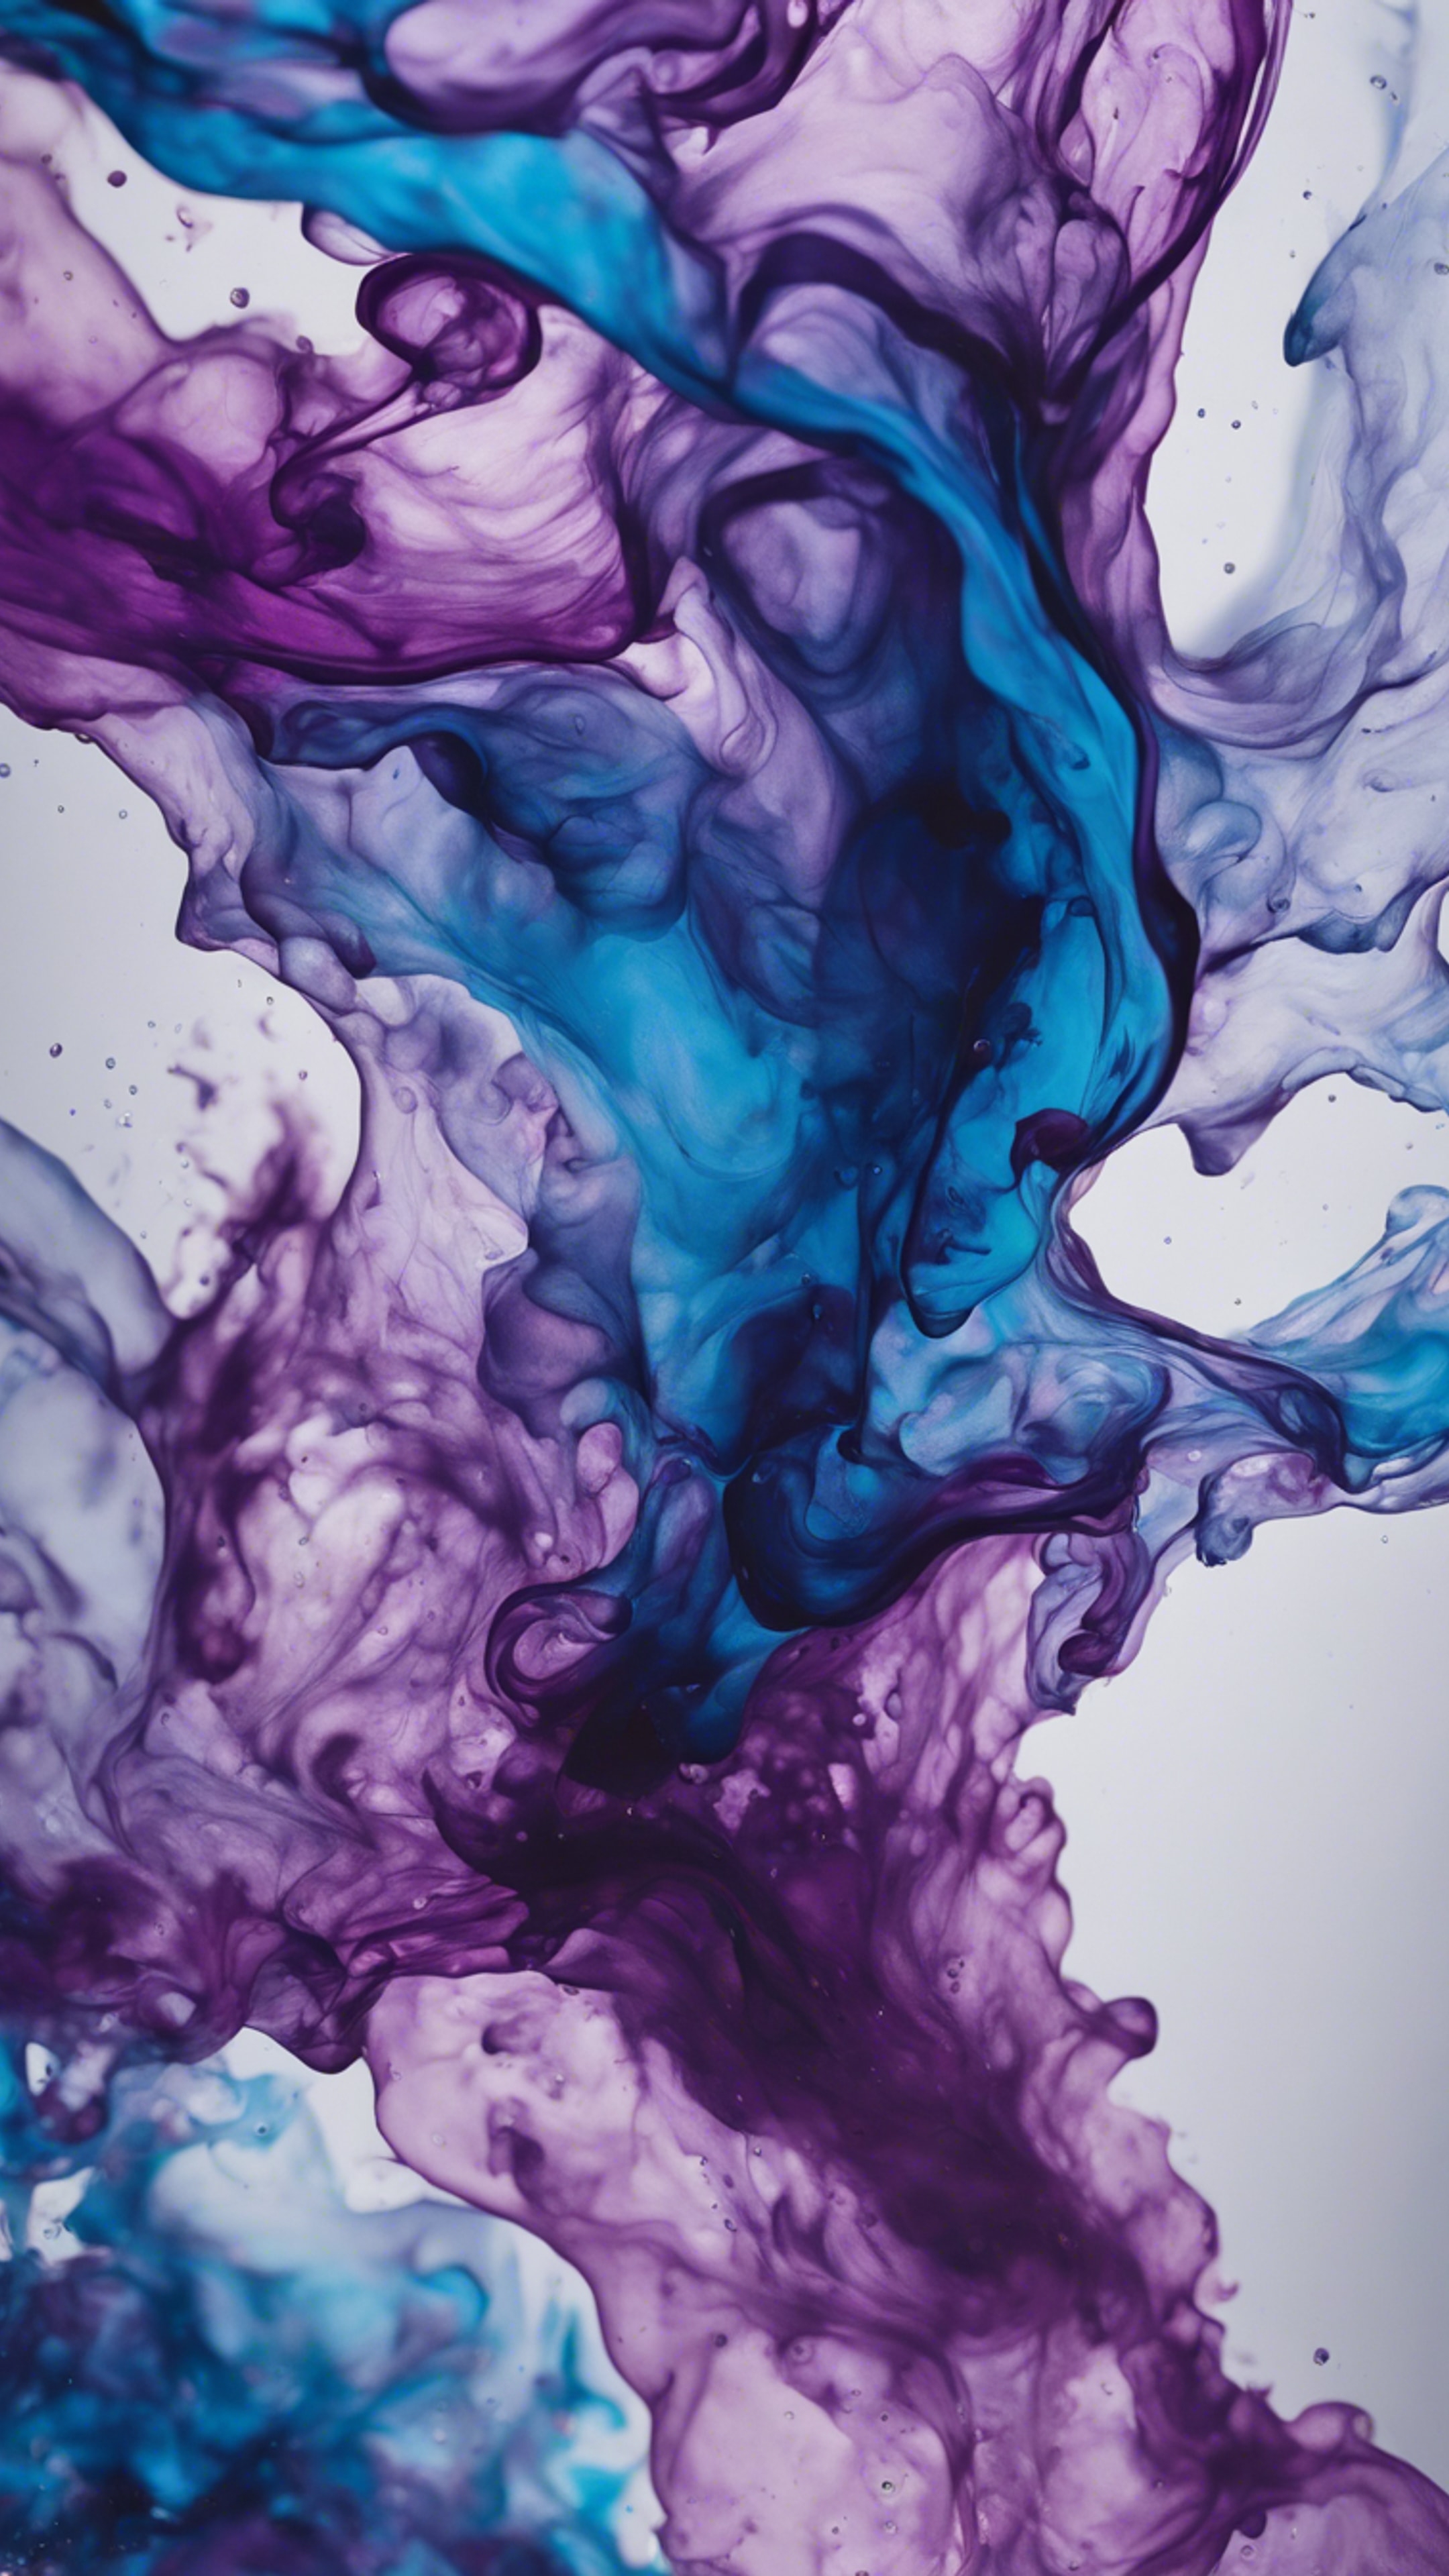 An abstract fluid art piece with swirling waves of ink in hues of cool blue and passionate purple. Wallpaper[1f0e9ffb93e84991a030]